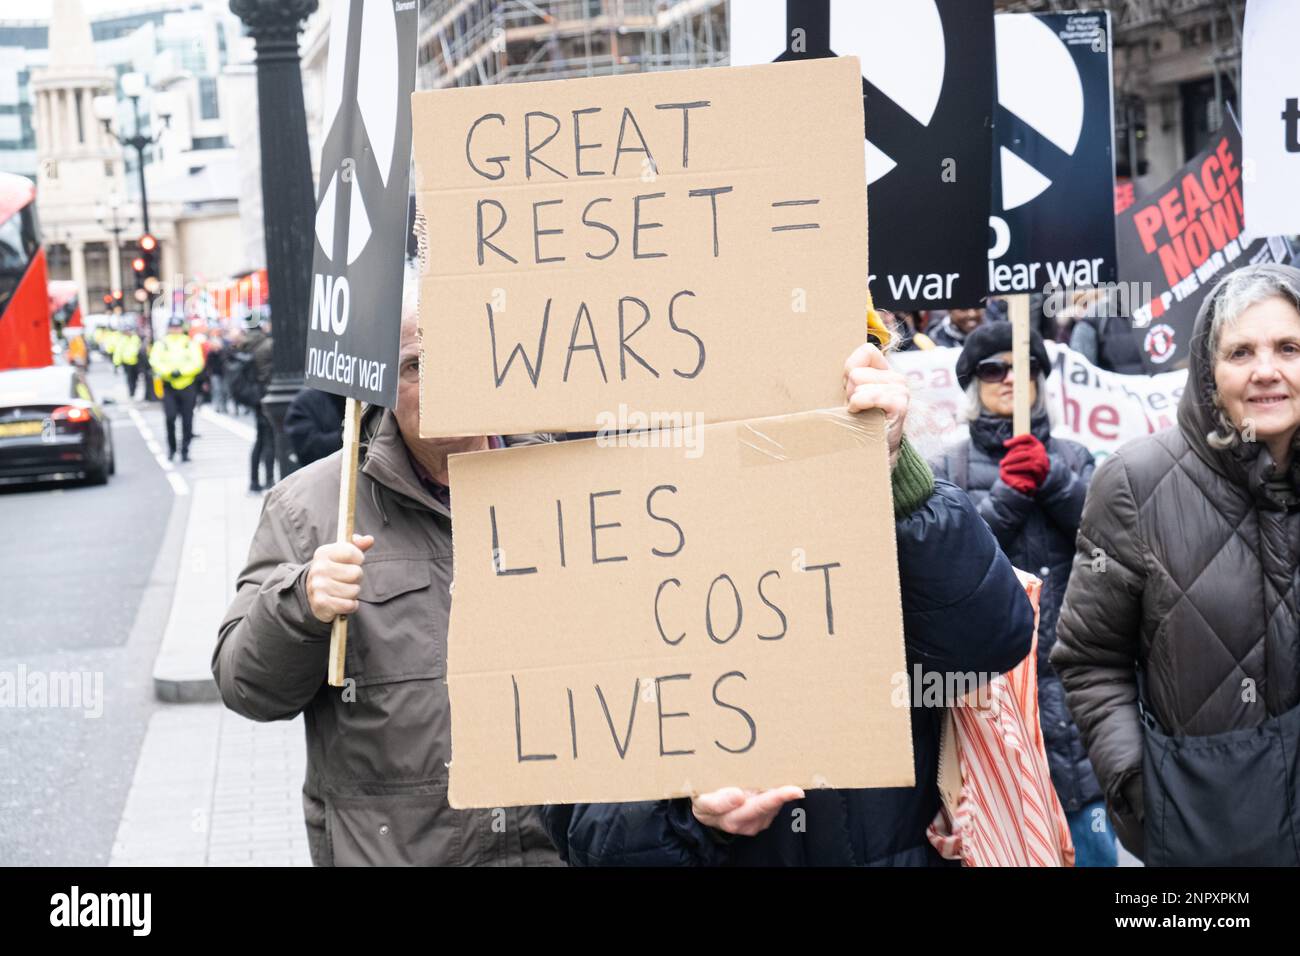 London, UK. 25th Feb, 2023. A protester holds a placard that reads 'Great reset = Wars', and 'Lies cost lives' during a demonstration march. Following the first anniversary of Russia-Ukraine War, protest groups gathered in Central London and marched to Trafalgar Square, calling for peace in Ukraine and Iran. Credit: SOPA Images Limited/Alamy Live News Stock Photo